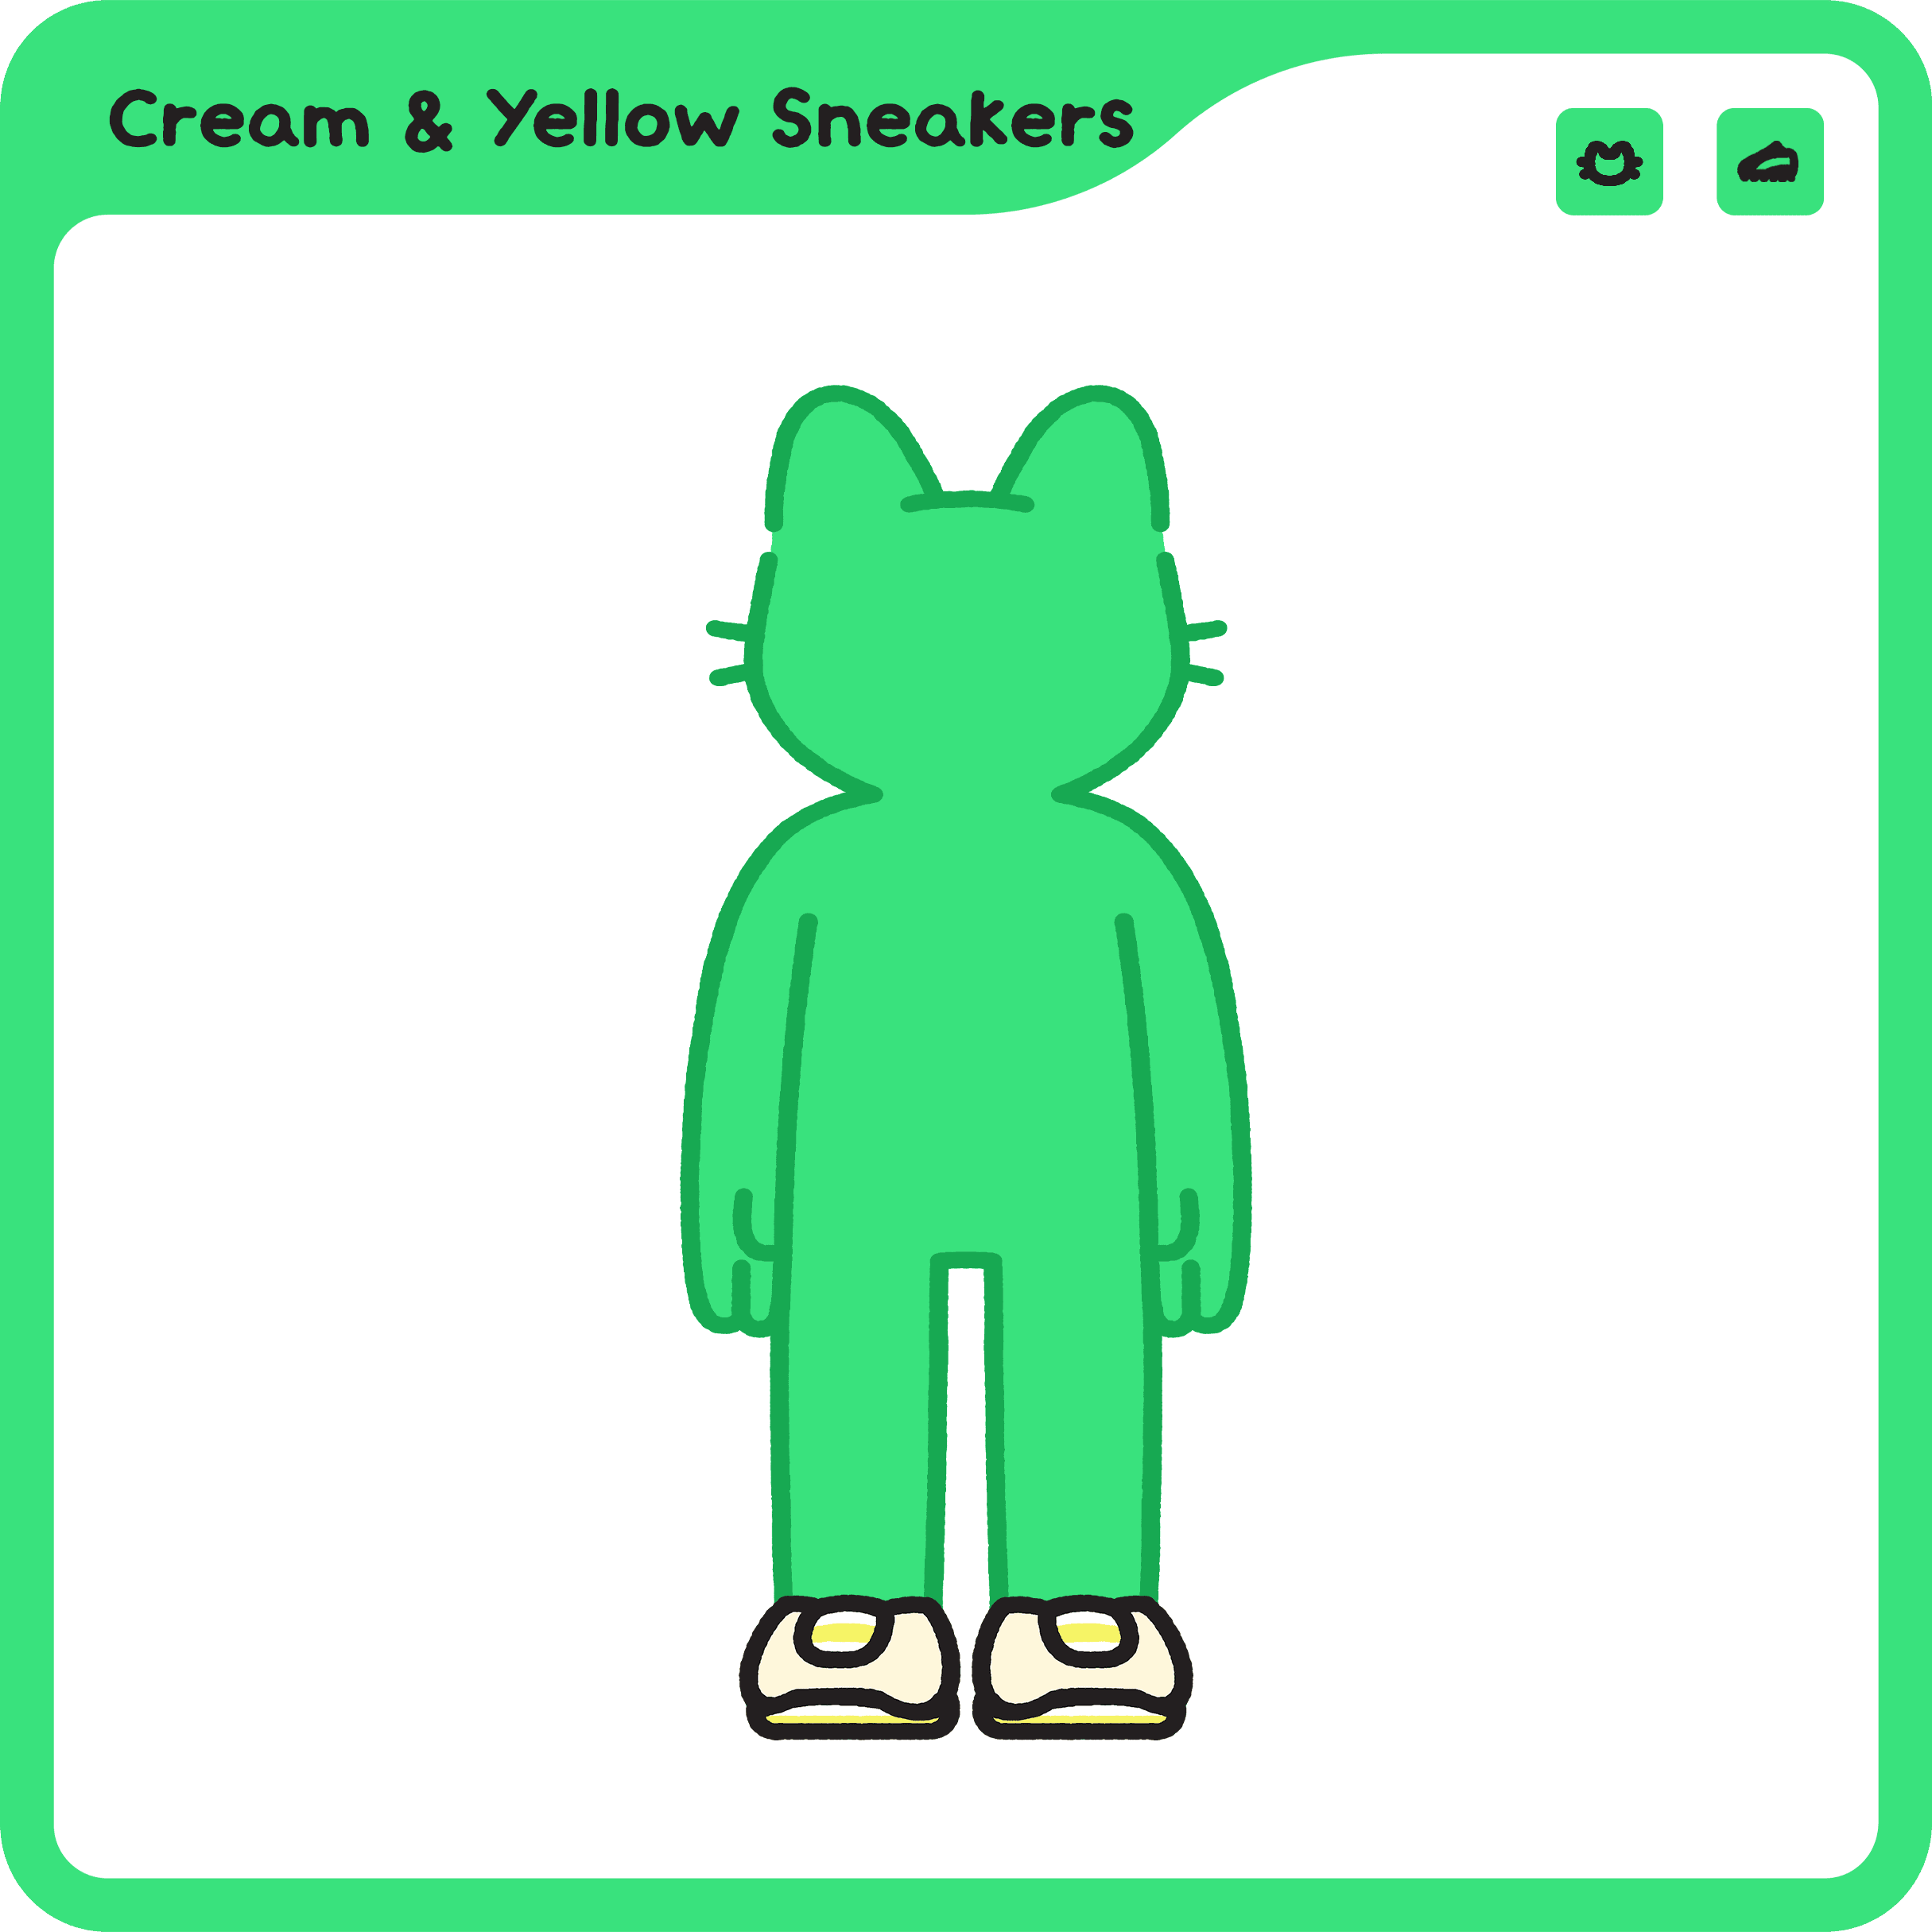 Cream and Yellow Sneakers